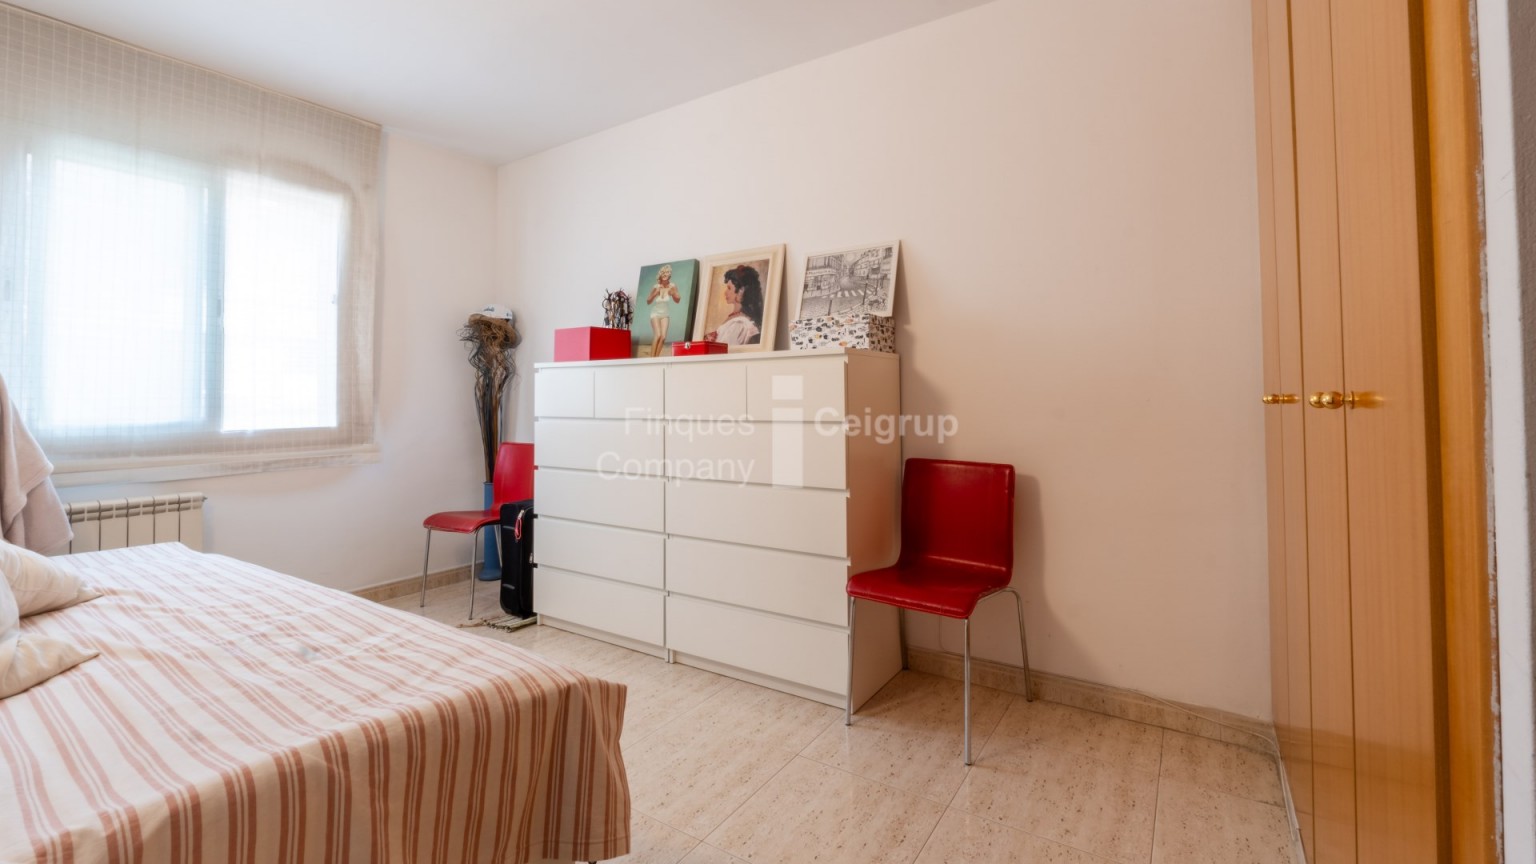 Apartment for sale in GIRONA with 88m2, 3 bedrooms, 2 bathrooms and parking